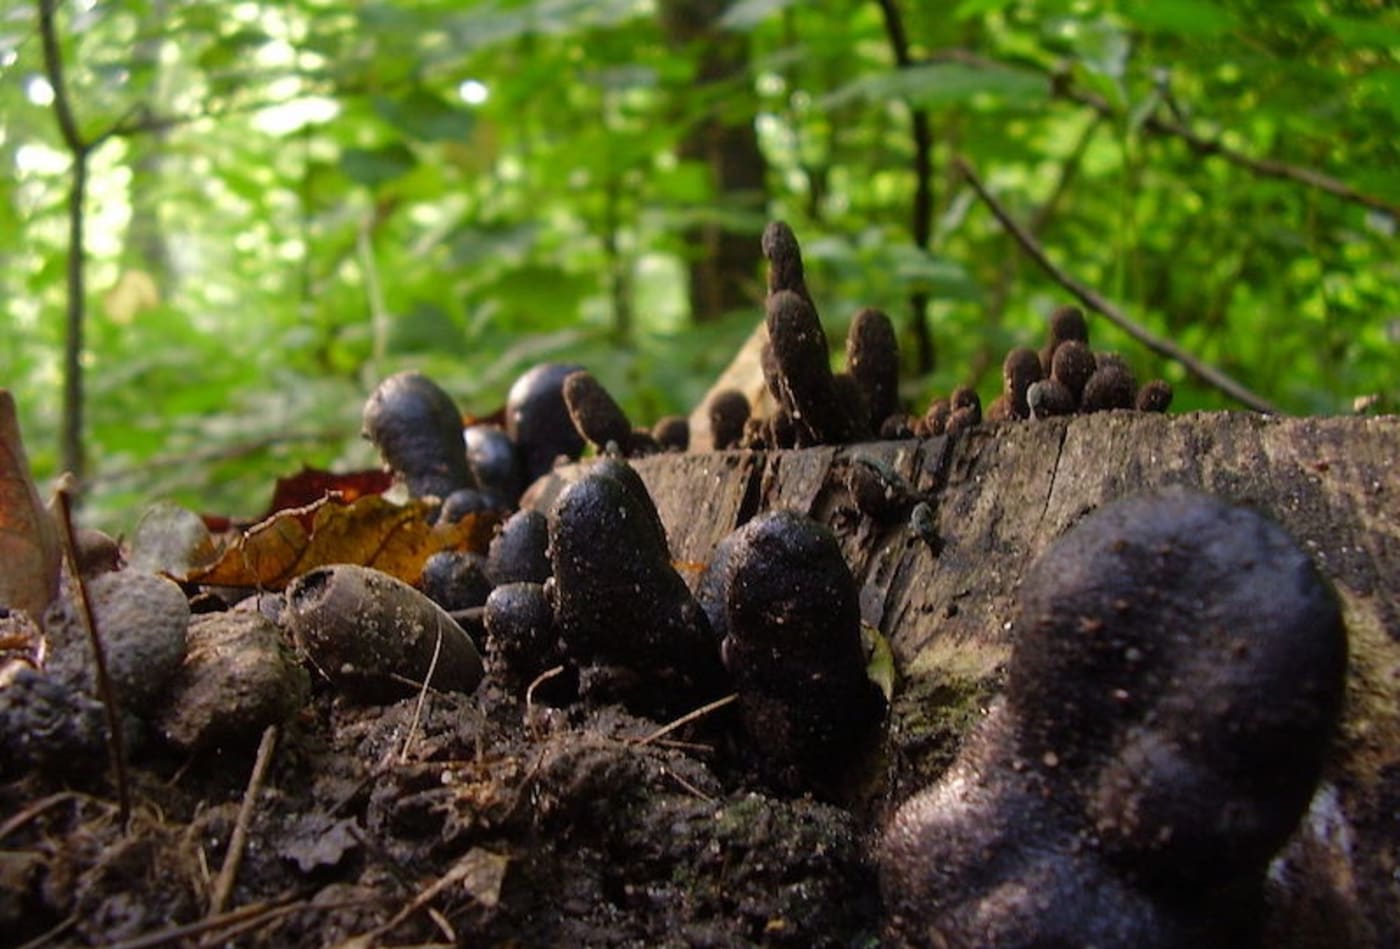 Xylaria polymorpha (dead mans fingers)